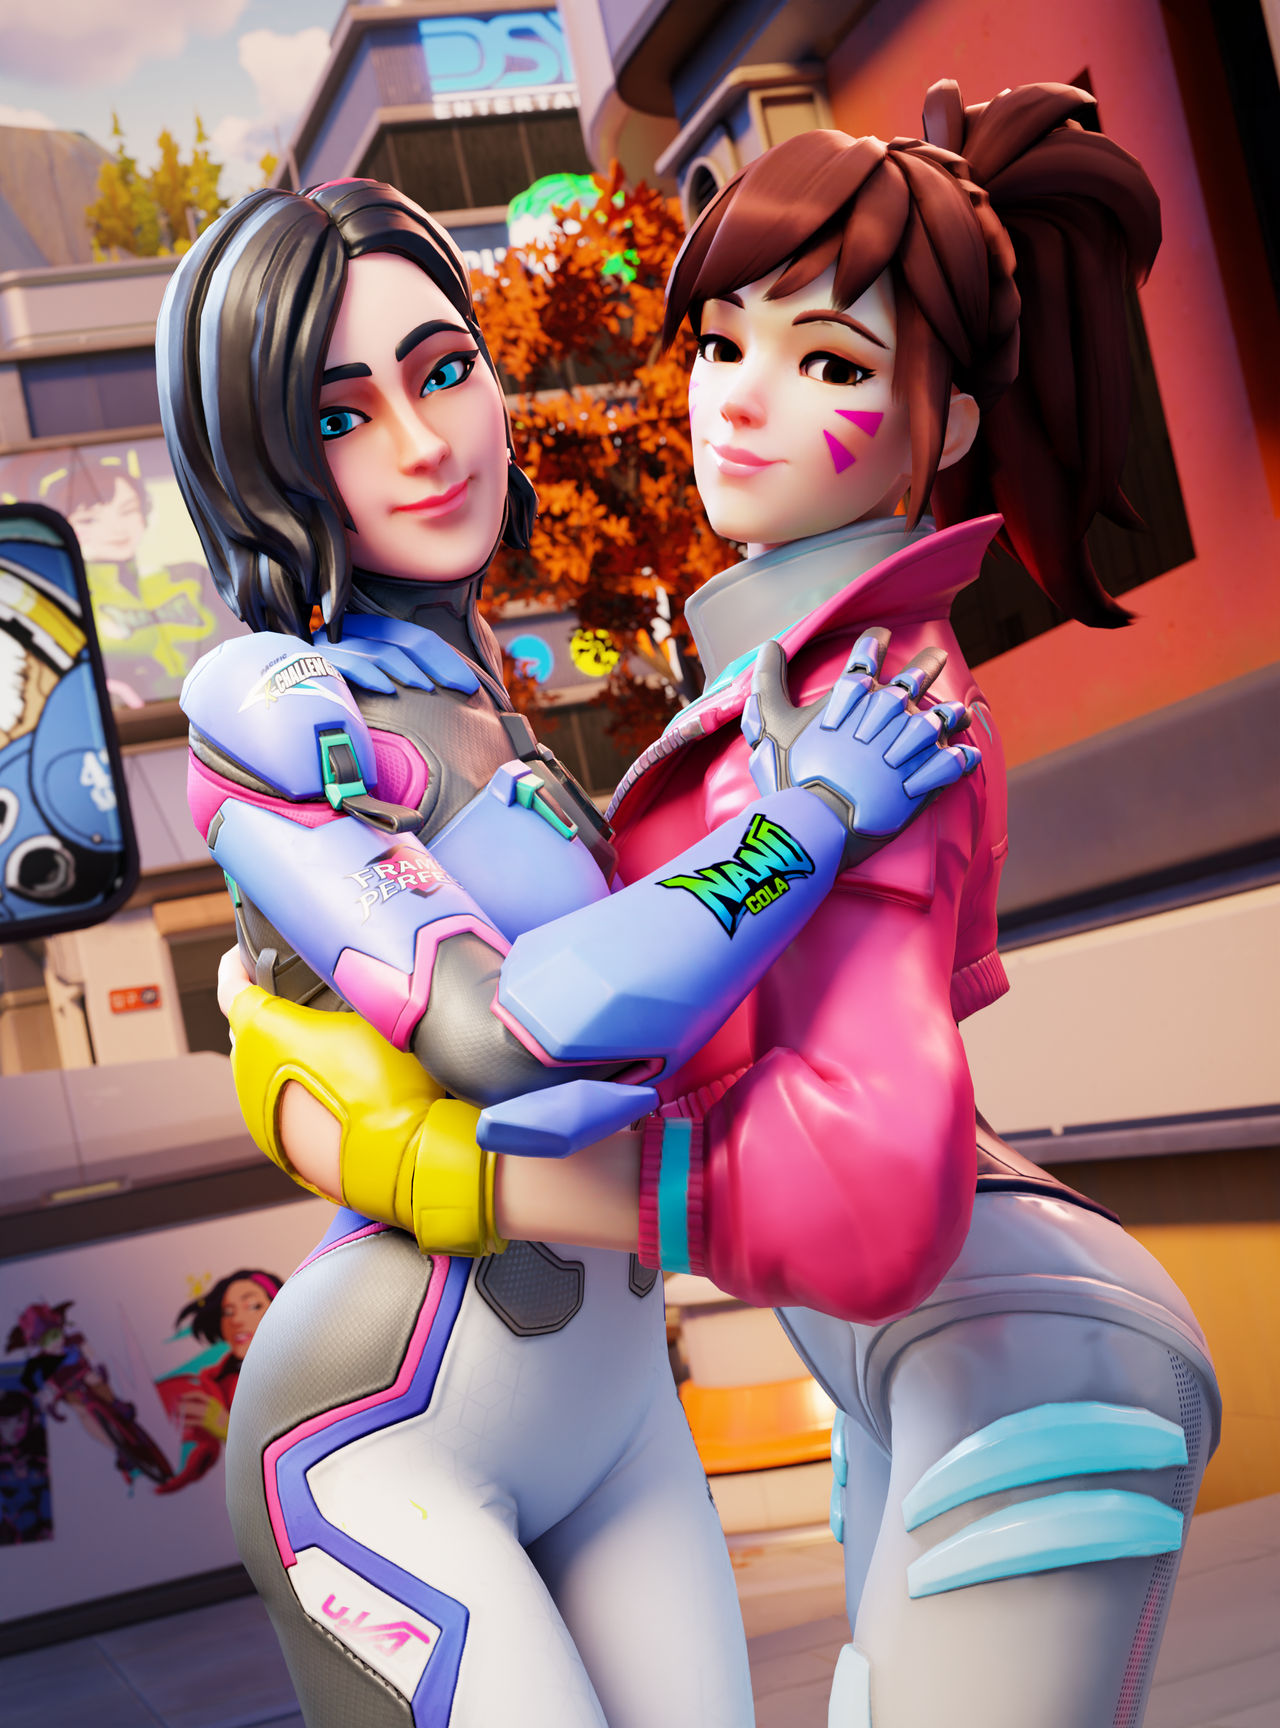 Rox and D.va, game on! by Necroplix on DeviantArt